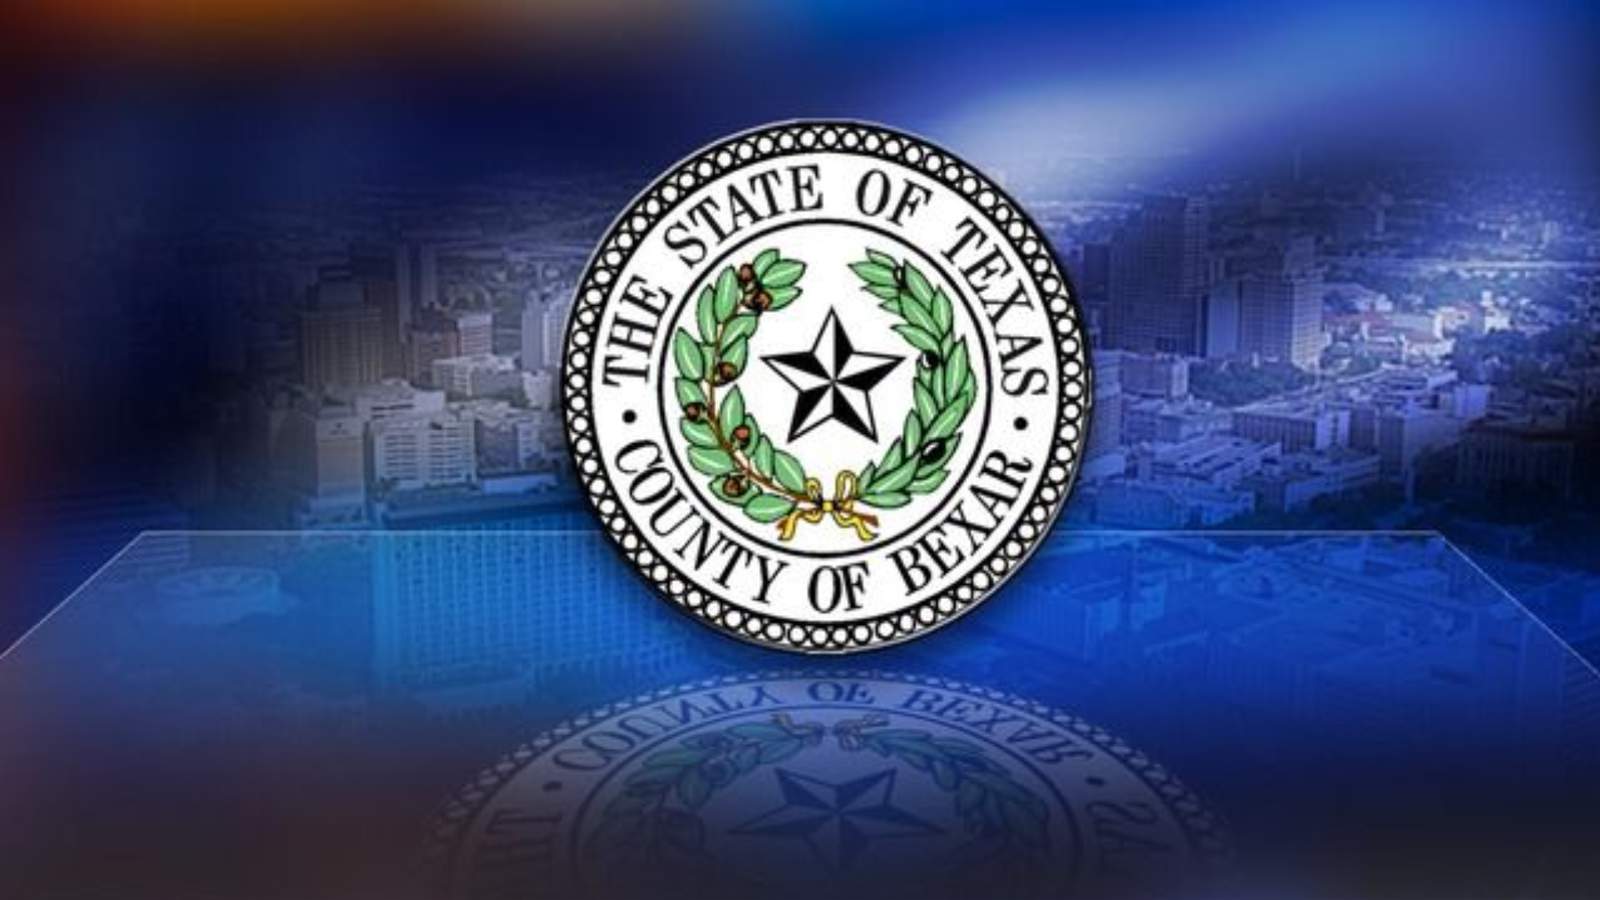 Bexar County residents can apply for temporary rental assistance